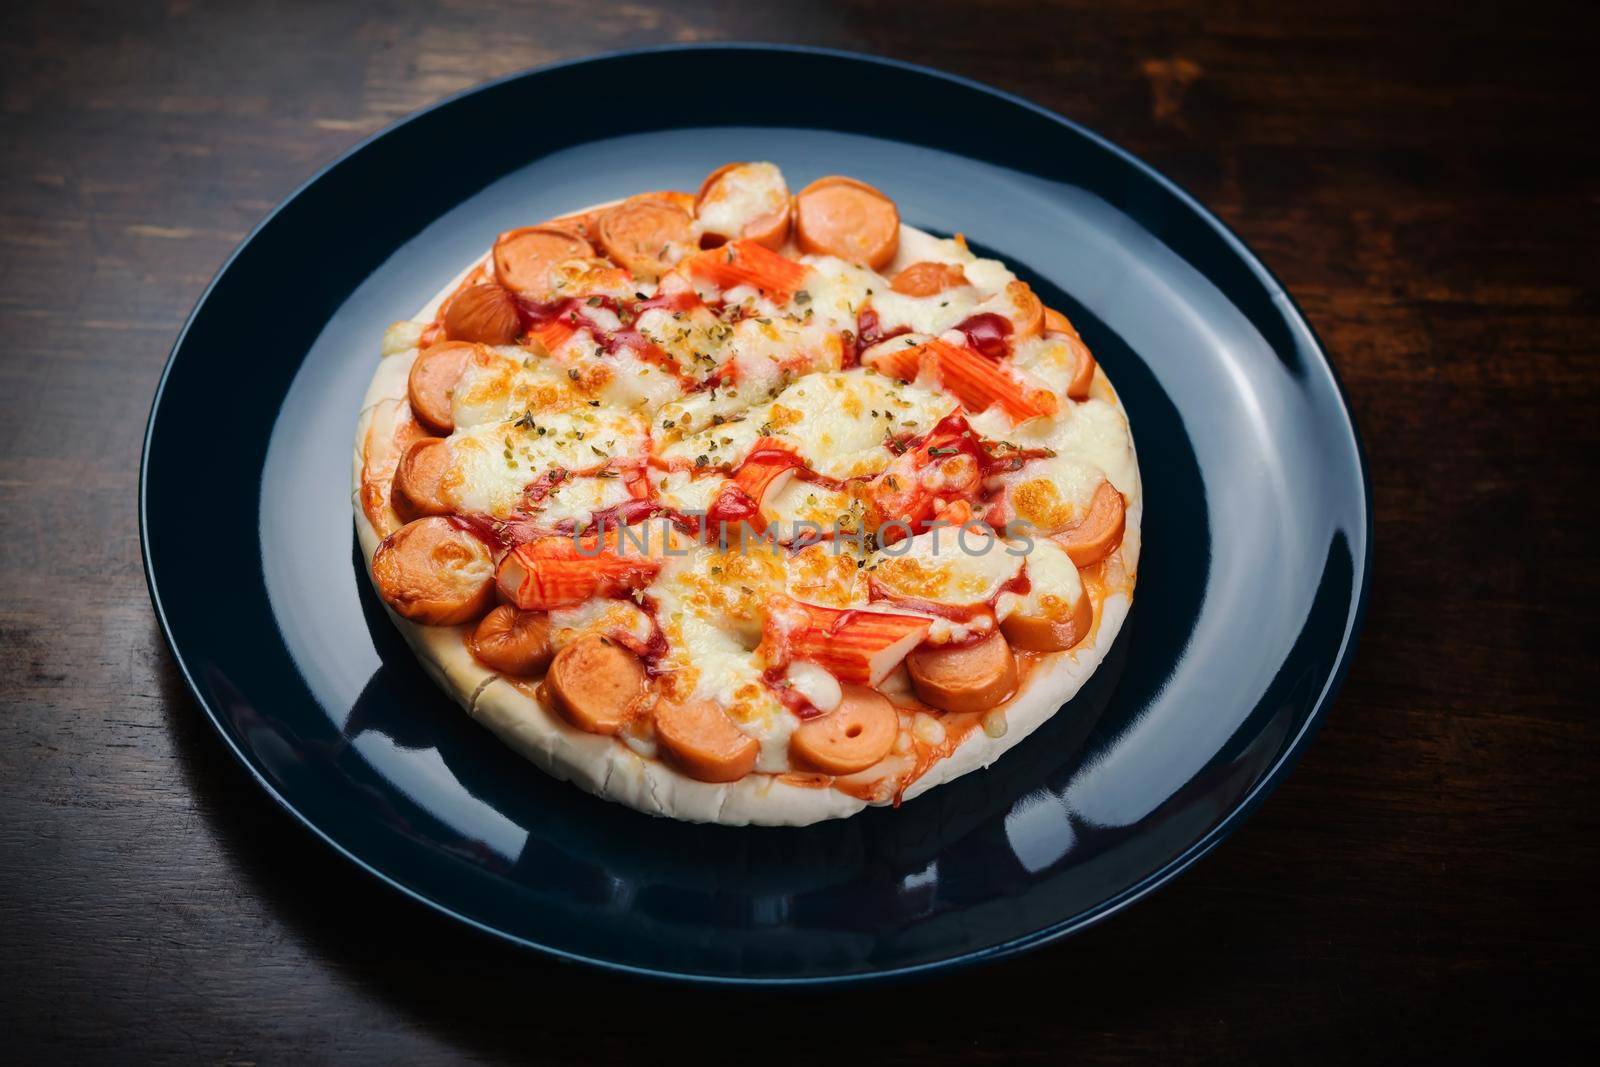 Pizza, sausage and crab sticks in a ceramic plate on a wooden table.